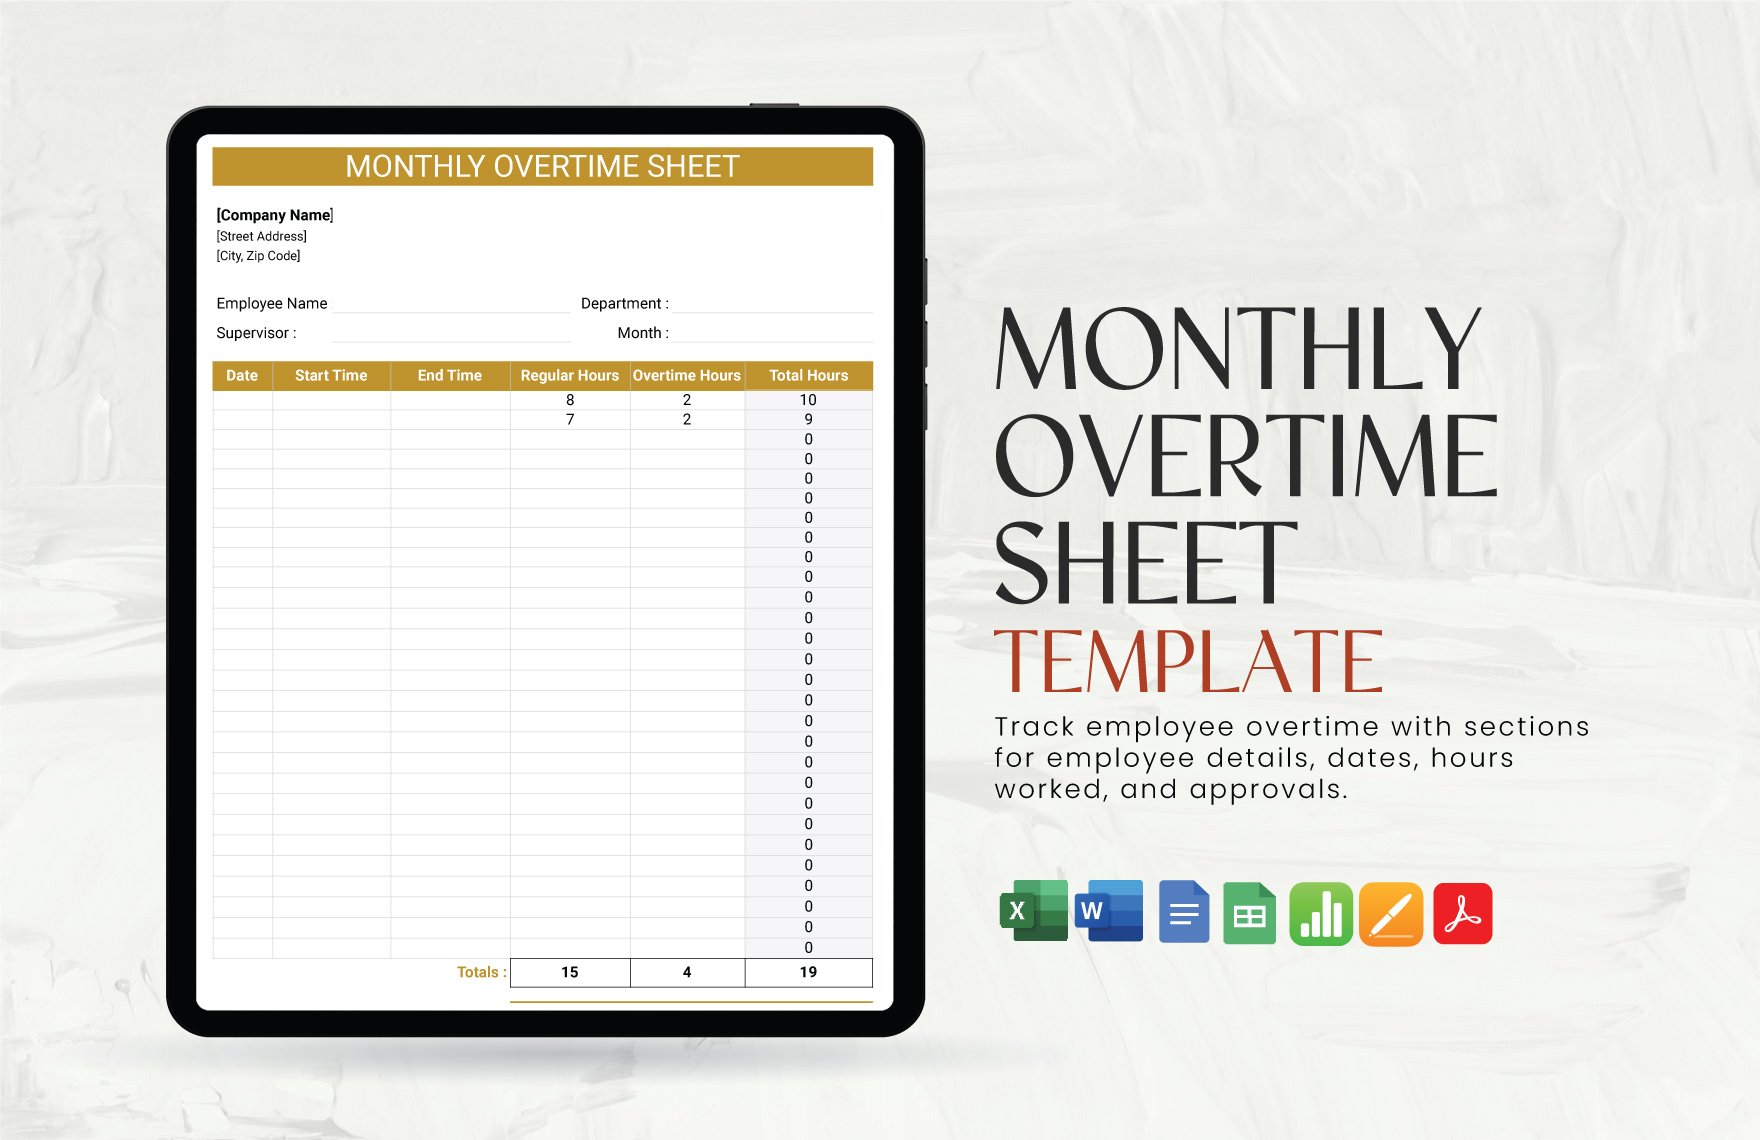 Monthly Overtime Sheet Template in Word, Google Docs, Excel, PDF, Google Sheets, Apple Pages, Apple Numbers